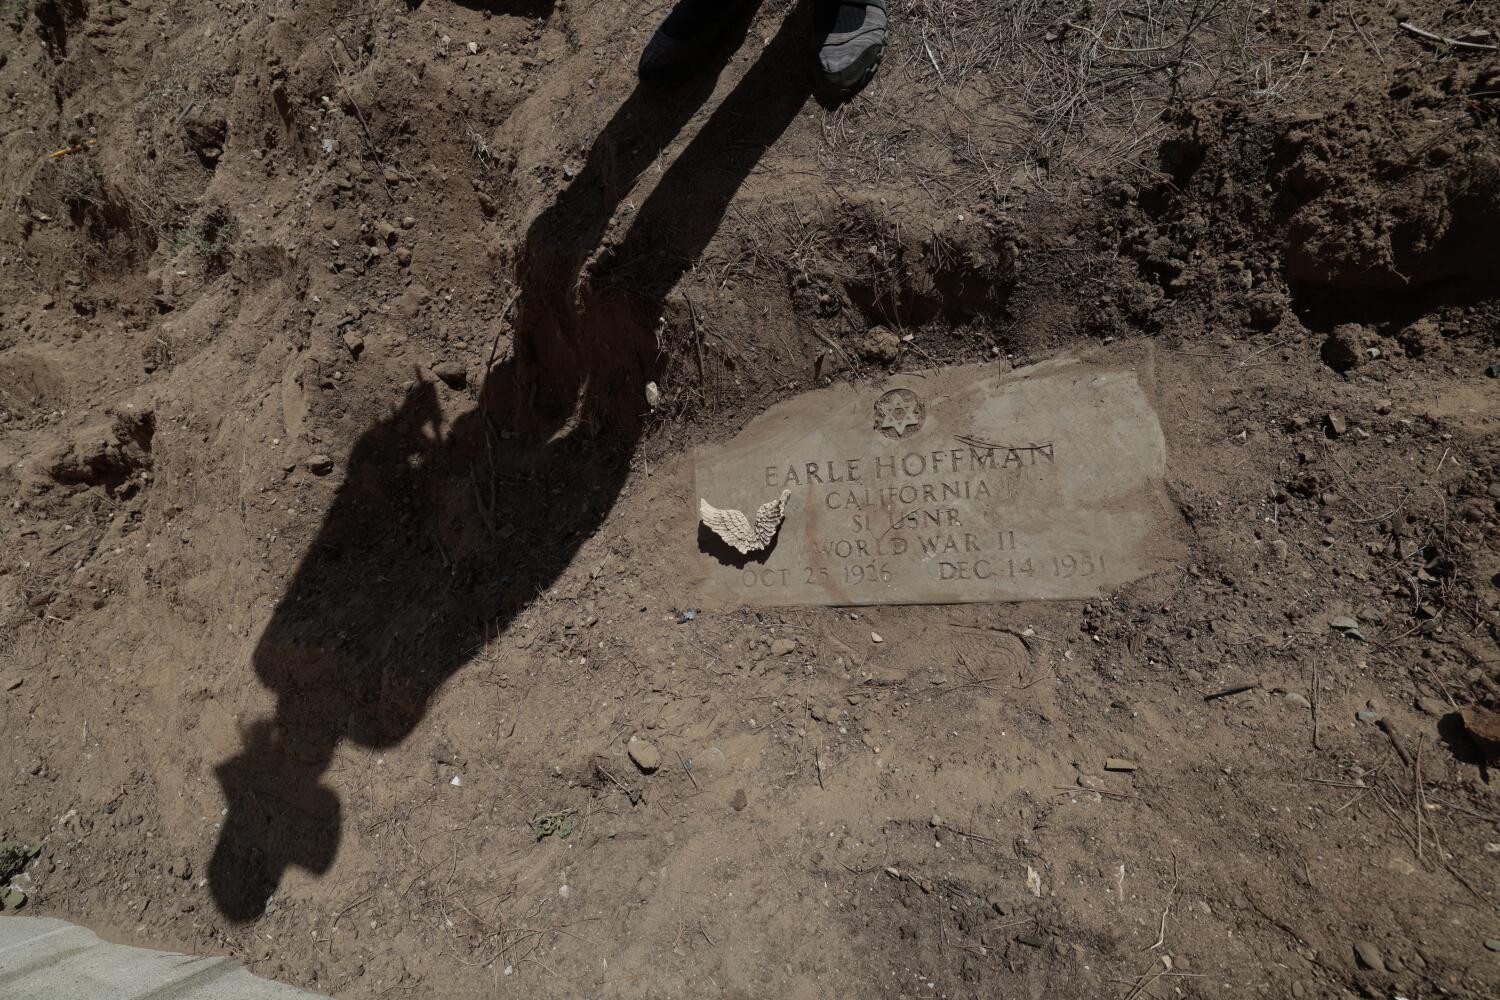 Hidden grave marker uncovered in Lawndale backyard could derail Metro C Line extension plans